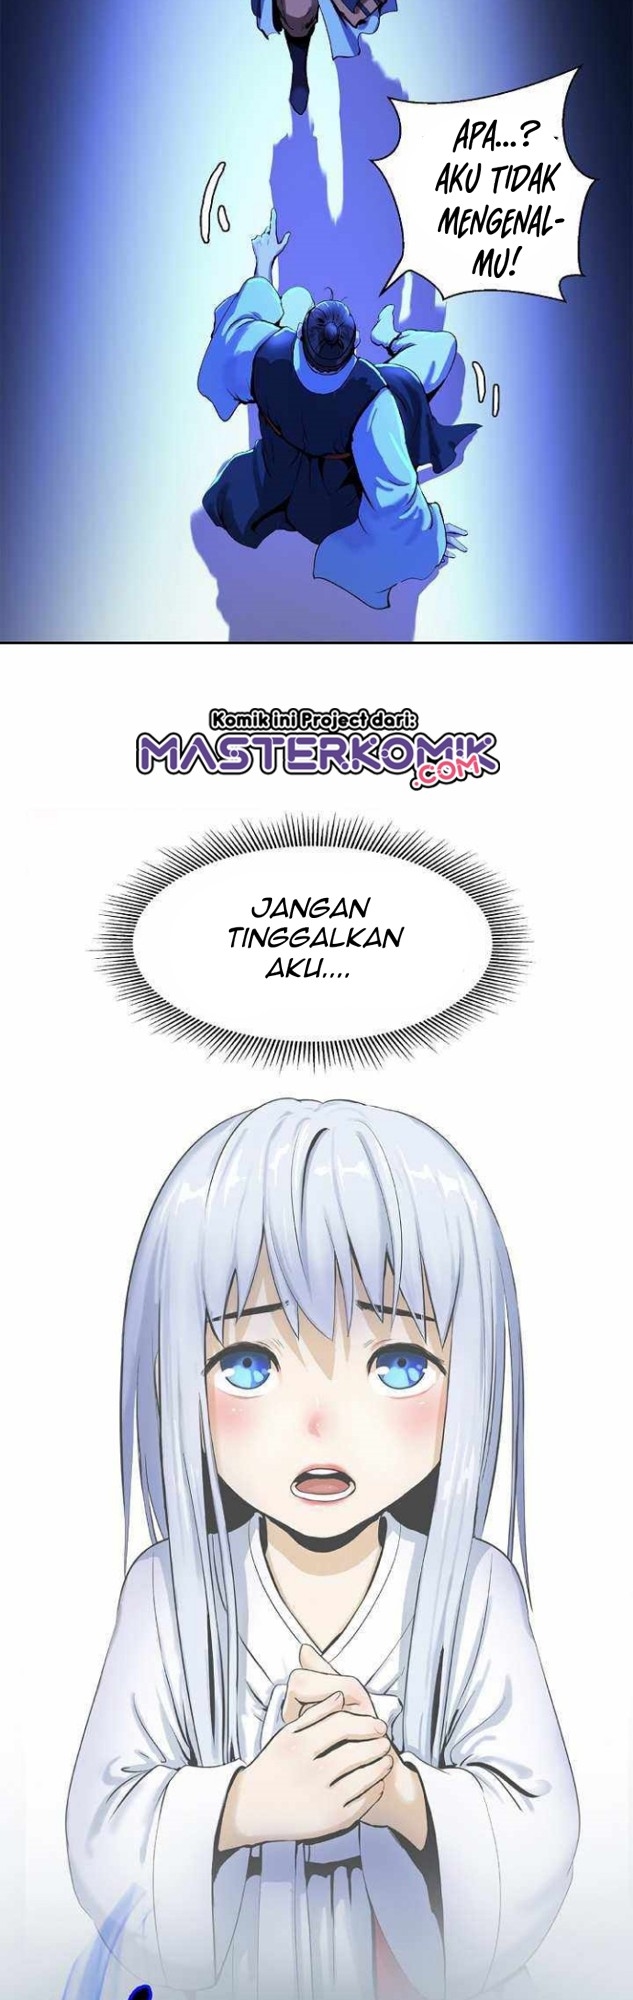 Cystic Story Chapter 21 5